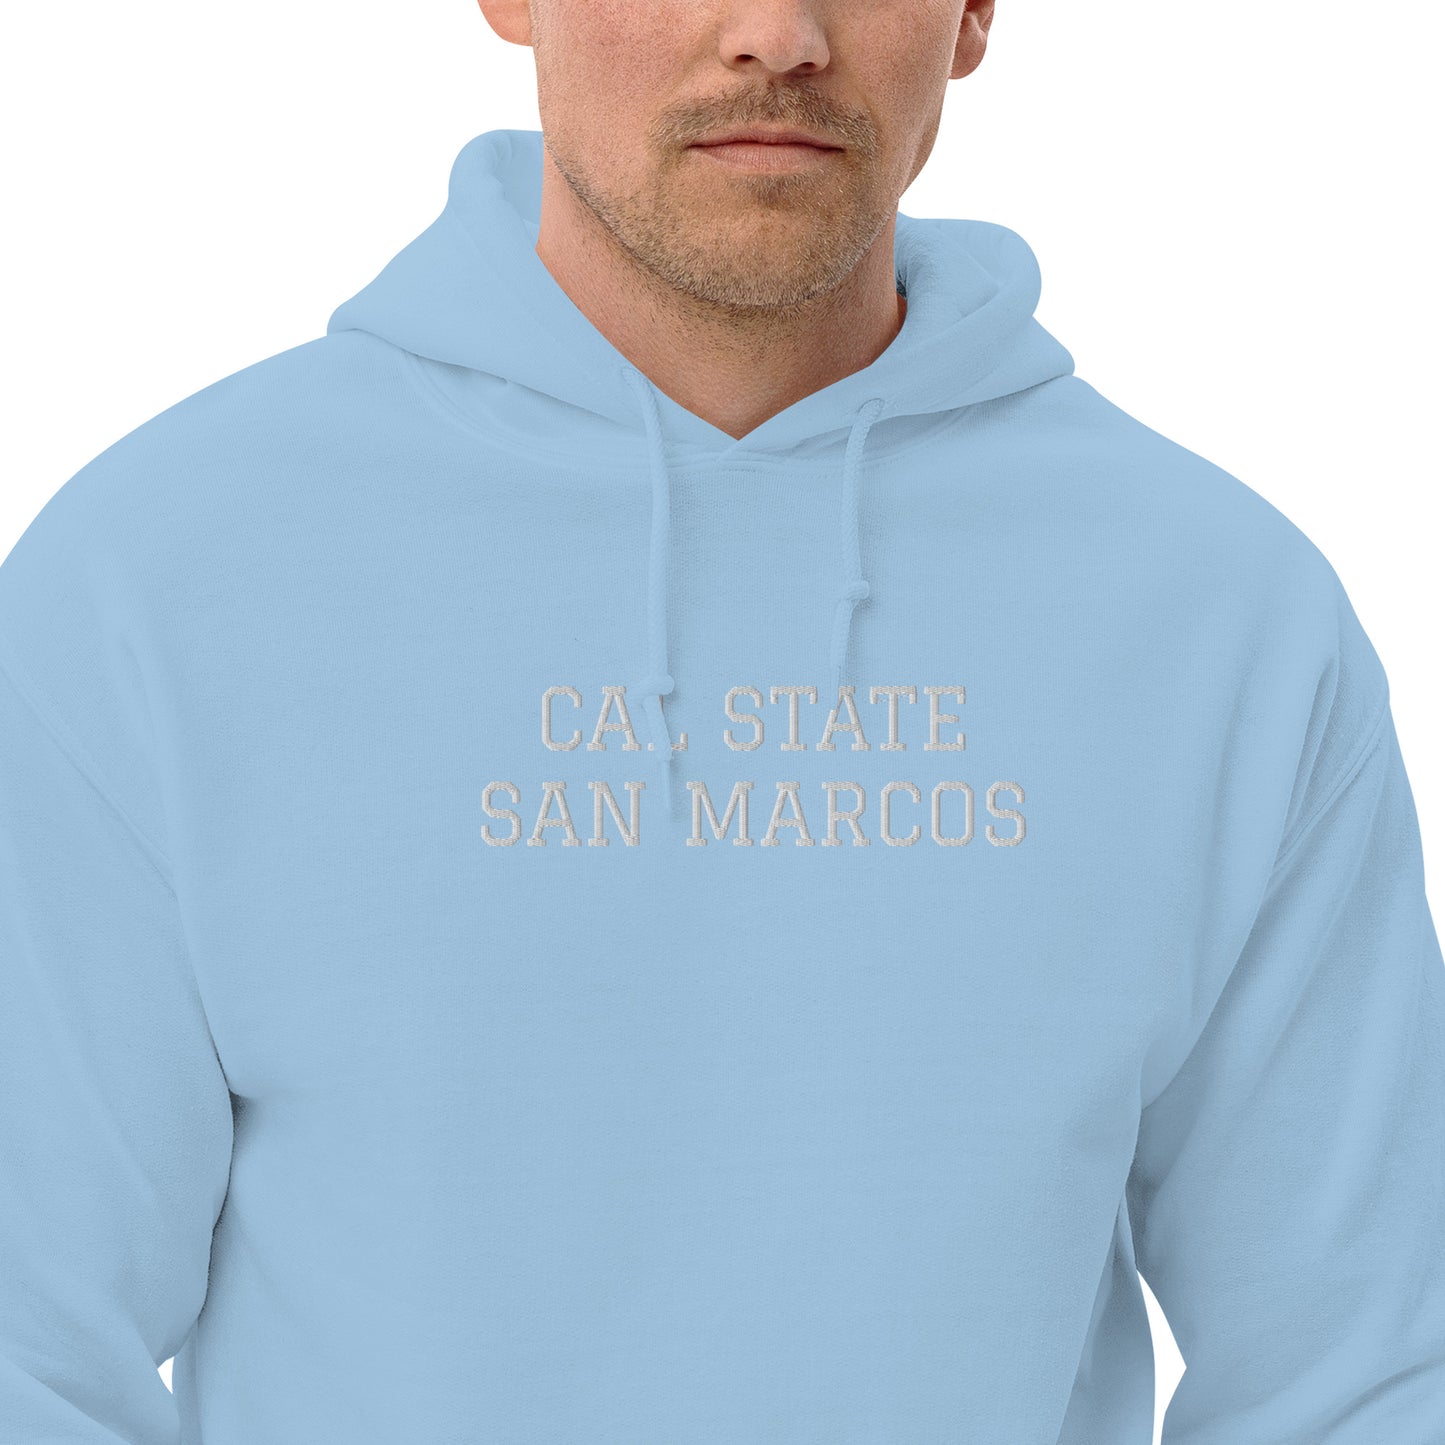 Cal State San Marcos Heavyweight Embroidered Hoodie